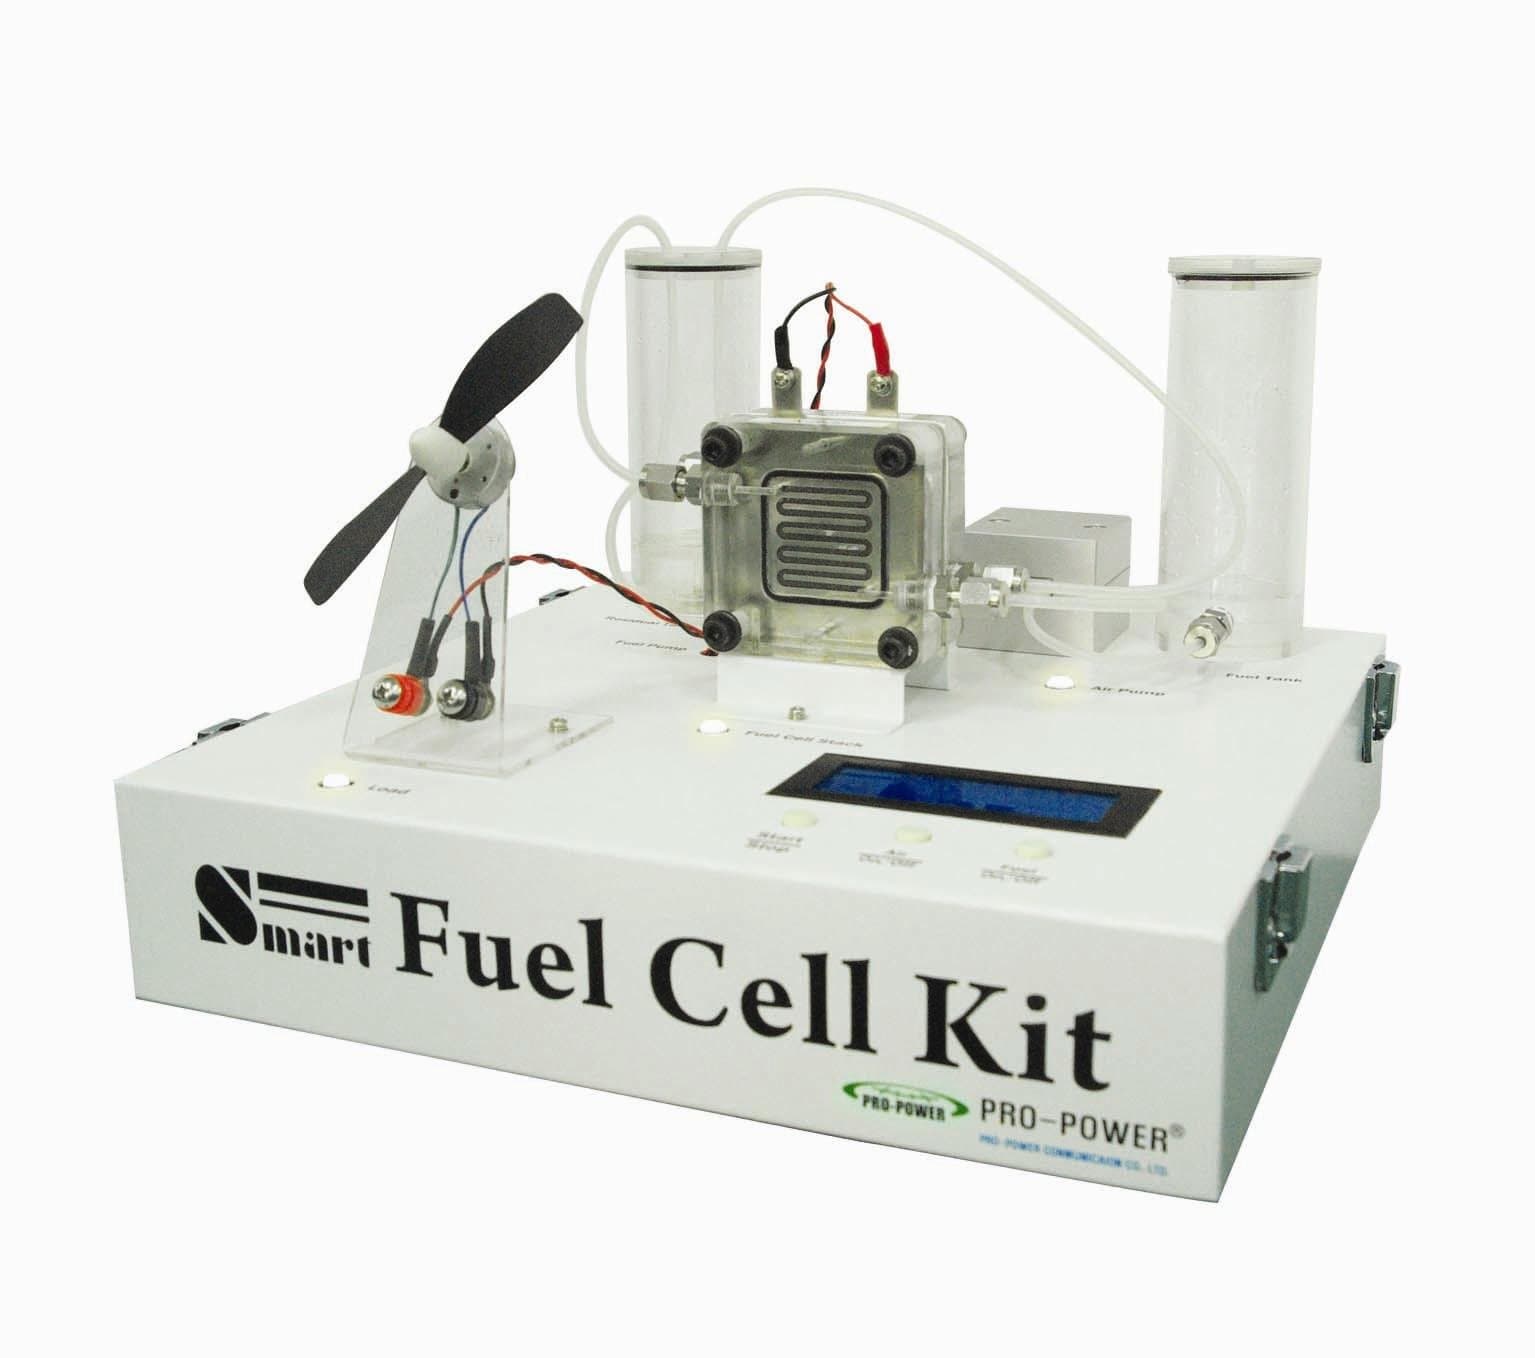 Smart Fuel Cell Kit